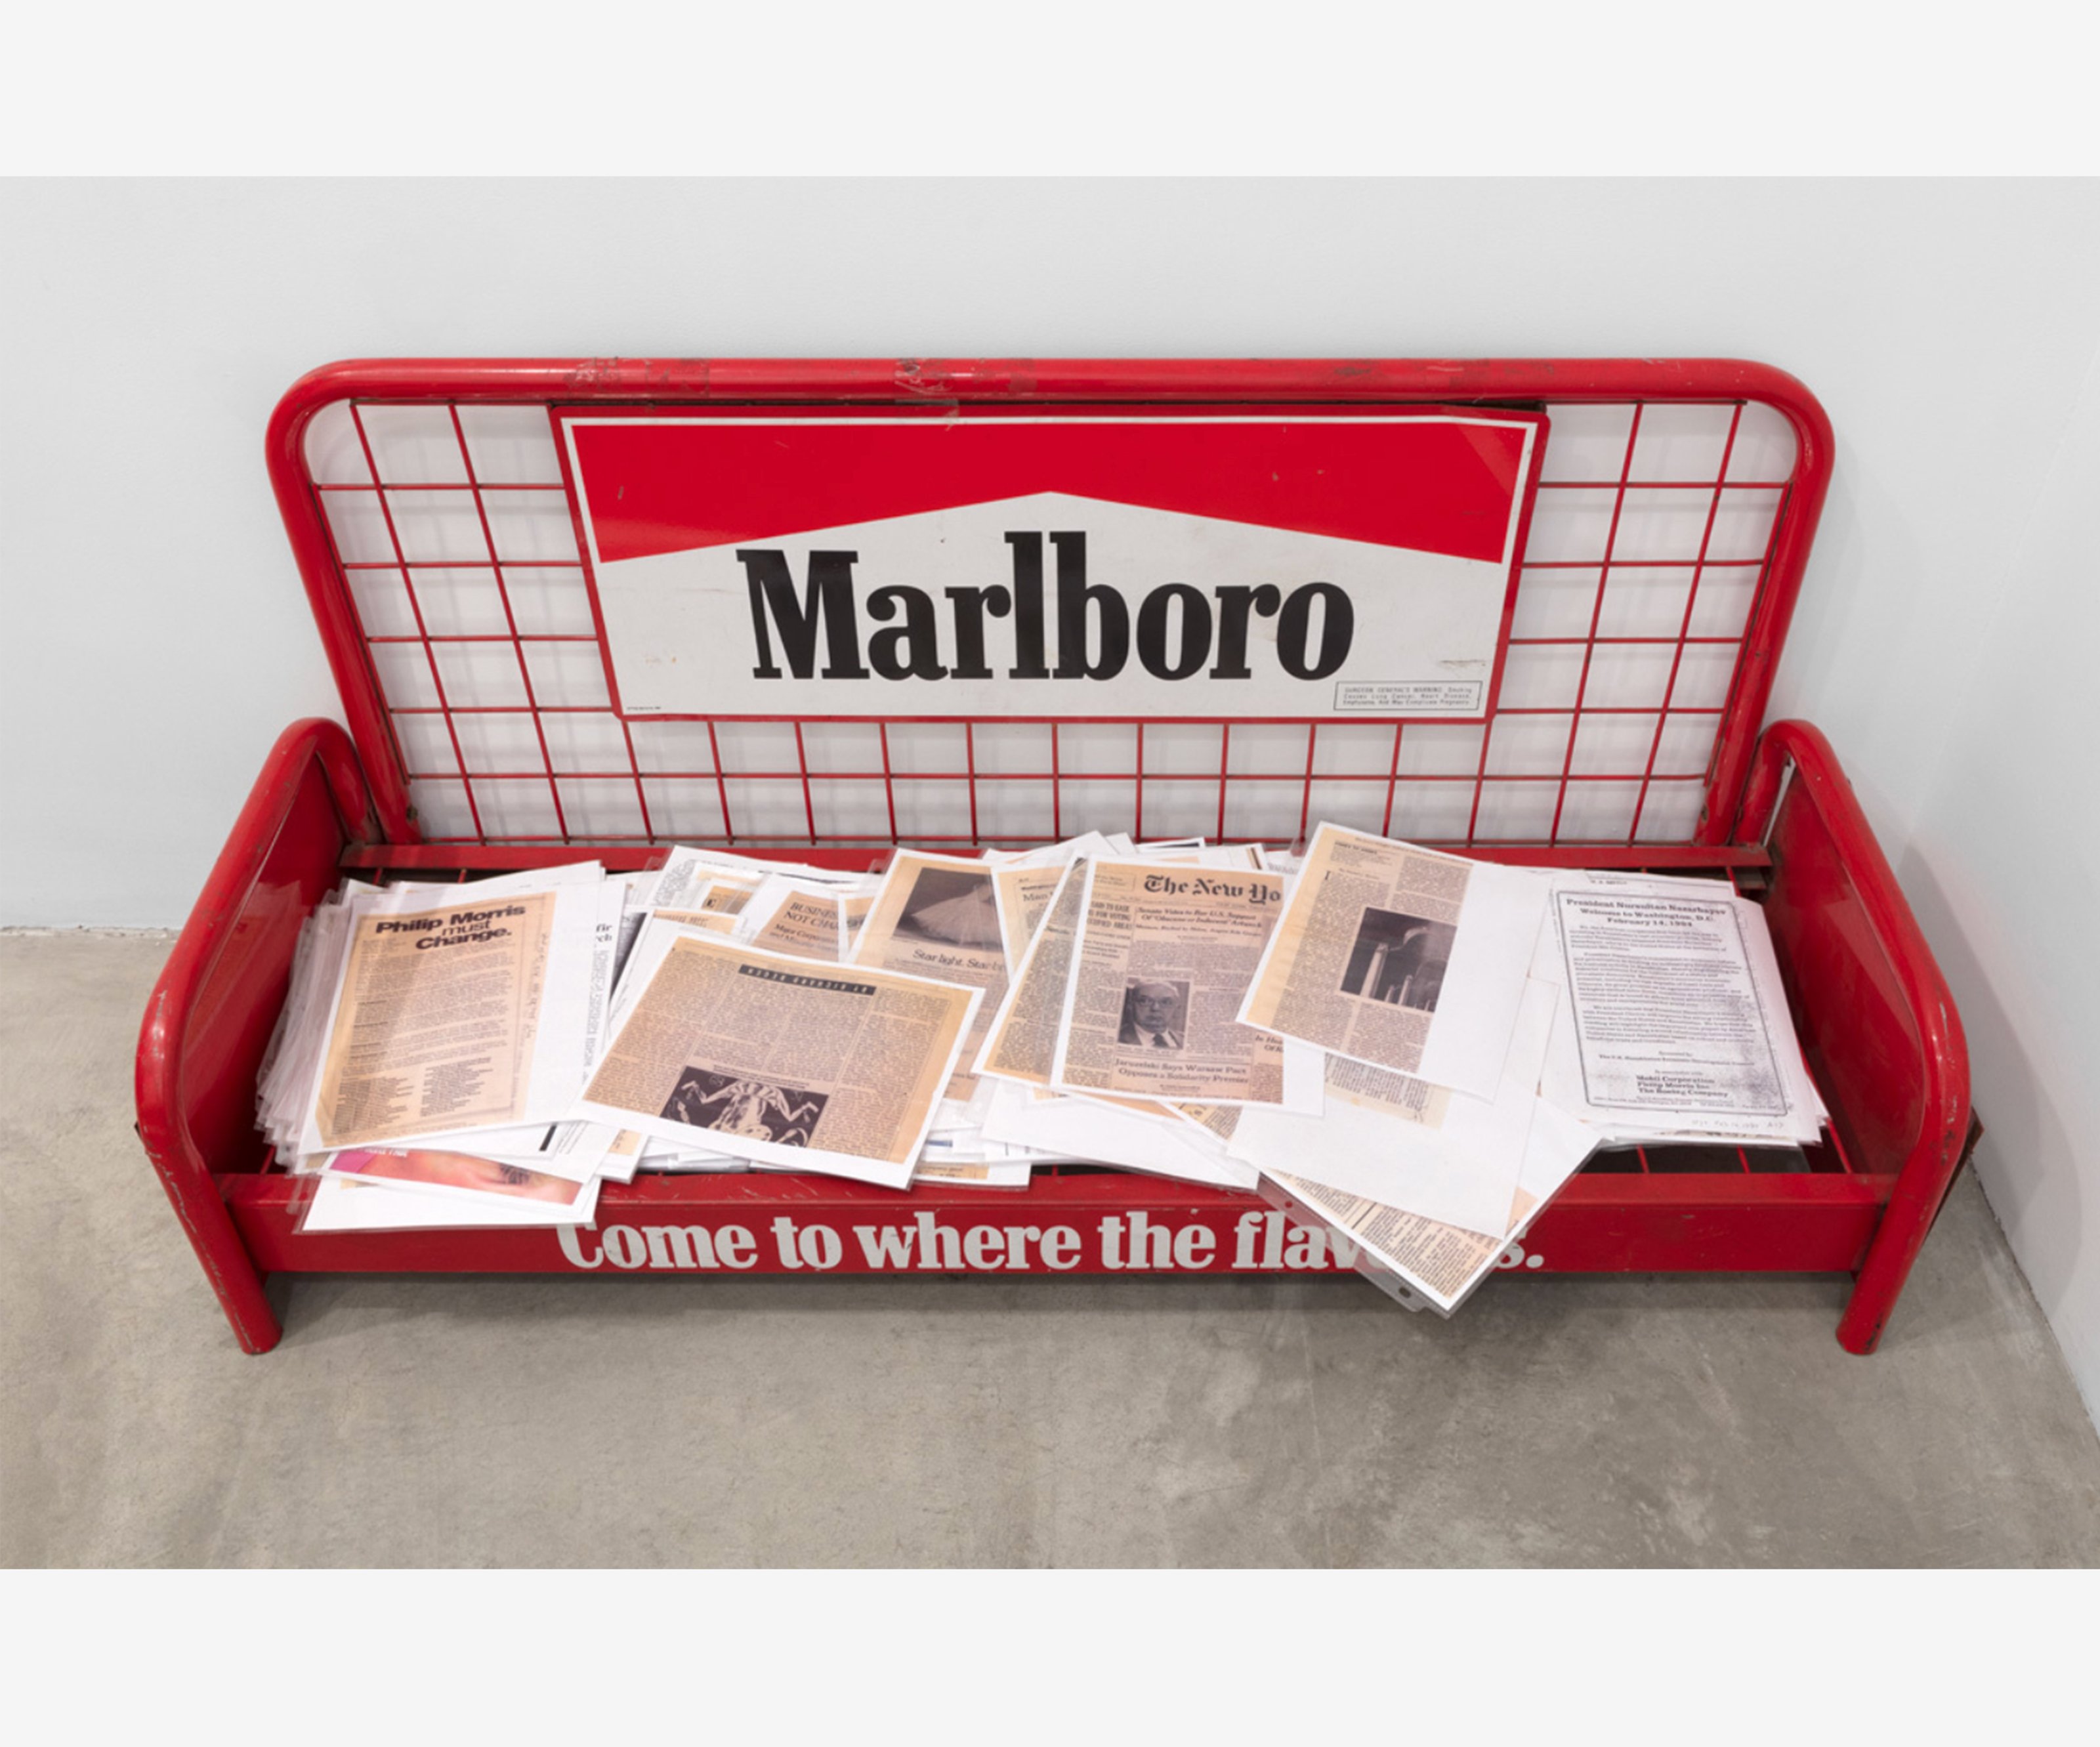 Marlboro bench with pamphlets spread out on it.